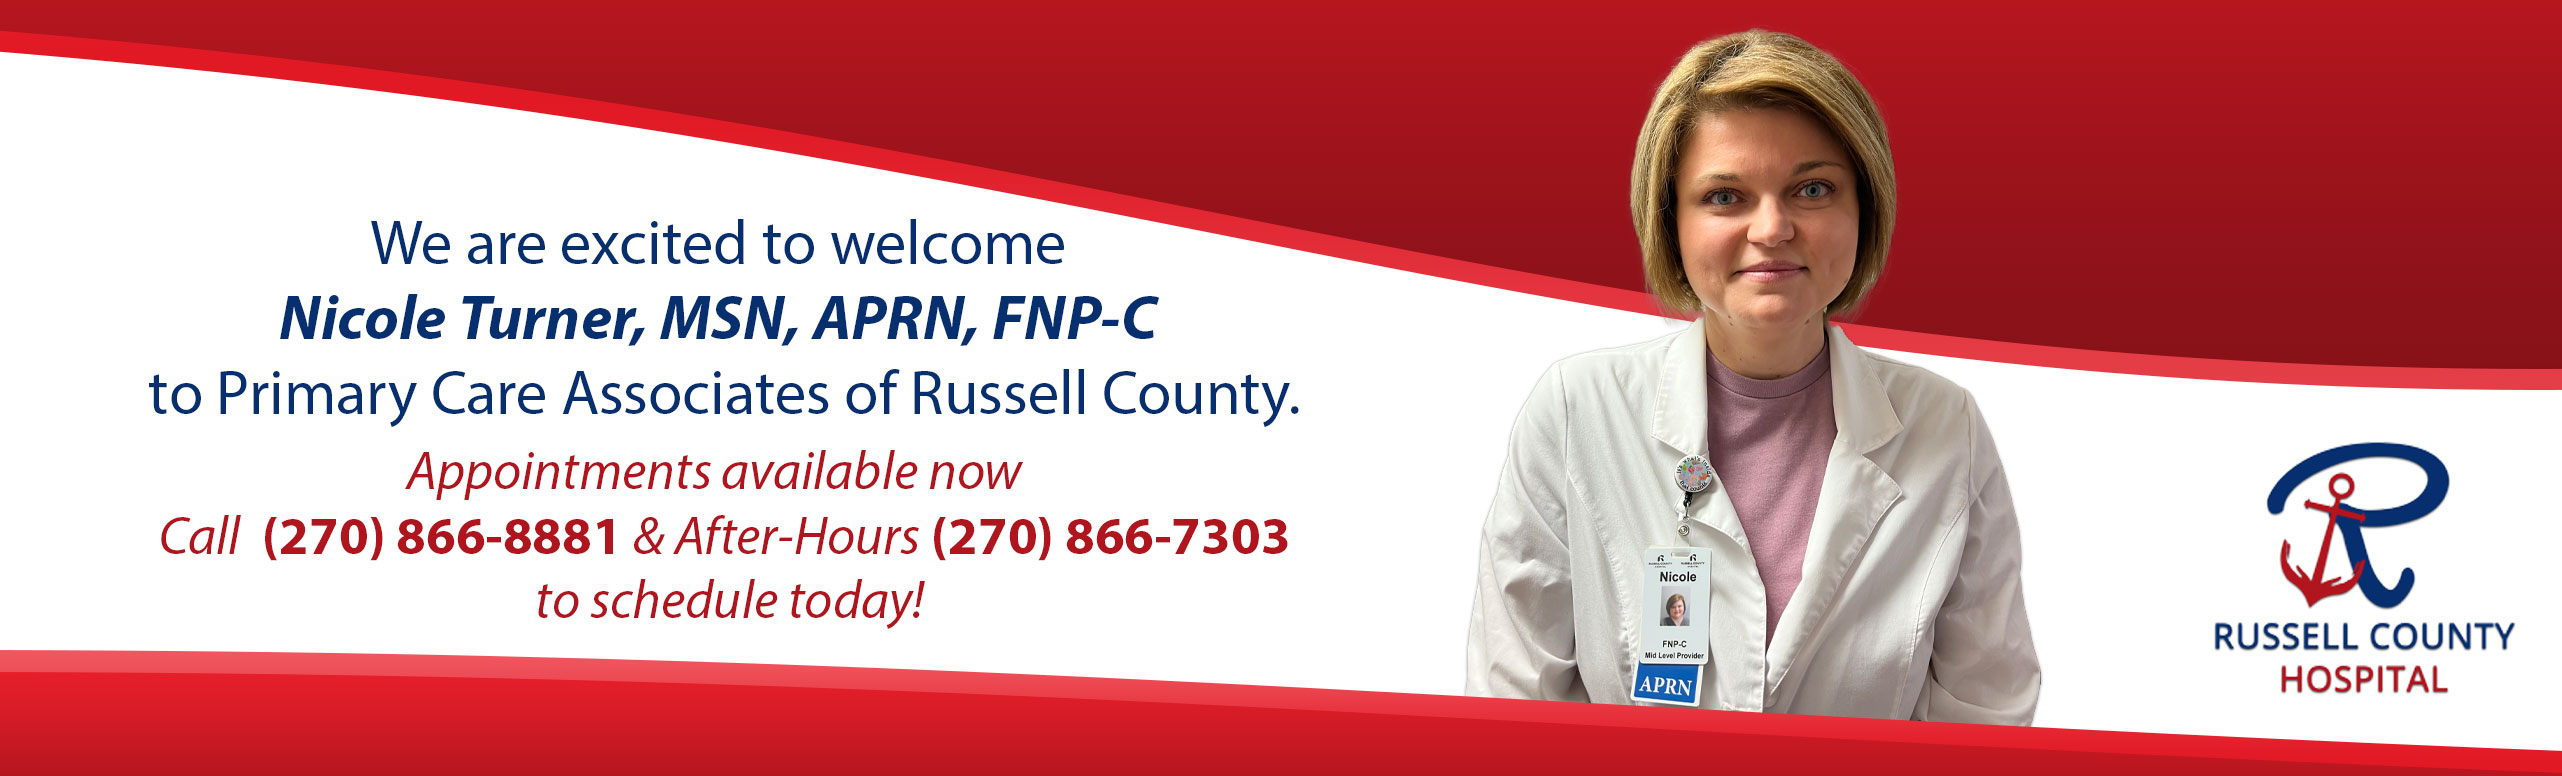 Banner picture of Nicole Turner, MSN, APRN, FNP-C. Banner says:
We are excited to welcome Nicole Turner, MSN, APRN, FNP-C, to Primary Care Associates of Russell County. Appointments available now
Call (270) 866-8881 & After-Hours (270) 866-7303 to schedule today!

RUSSELL COUNTY HOSPITAL